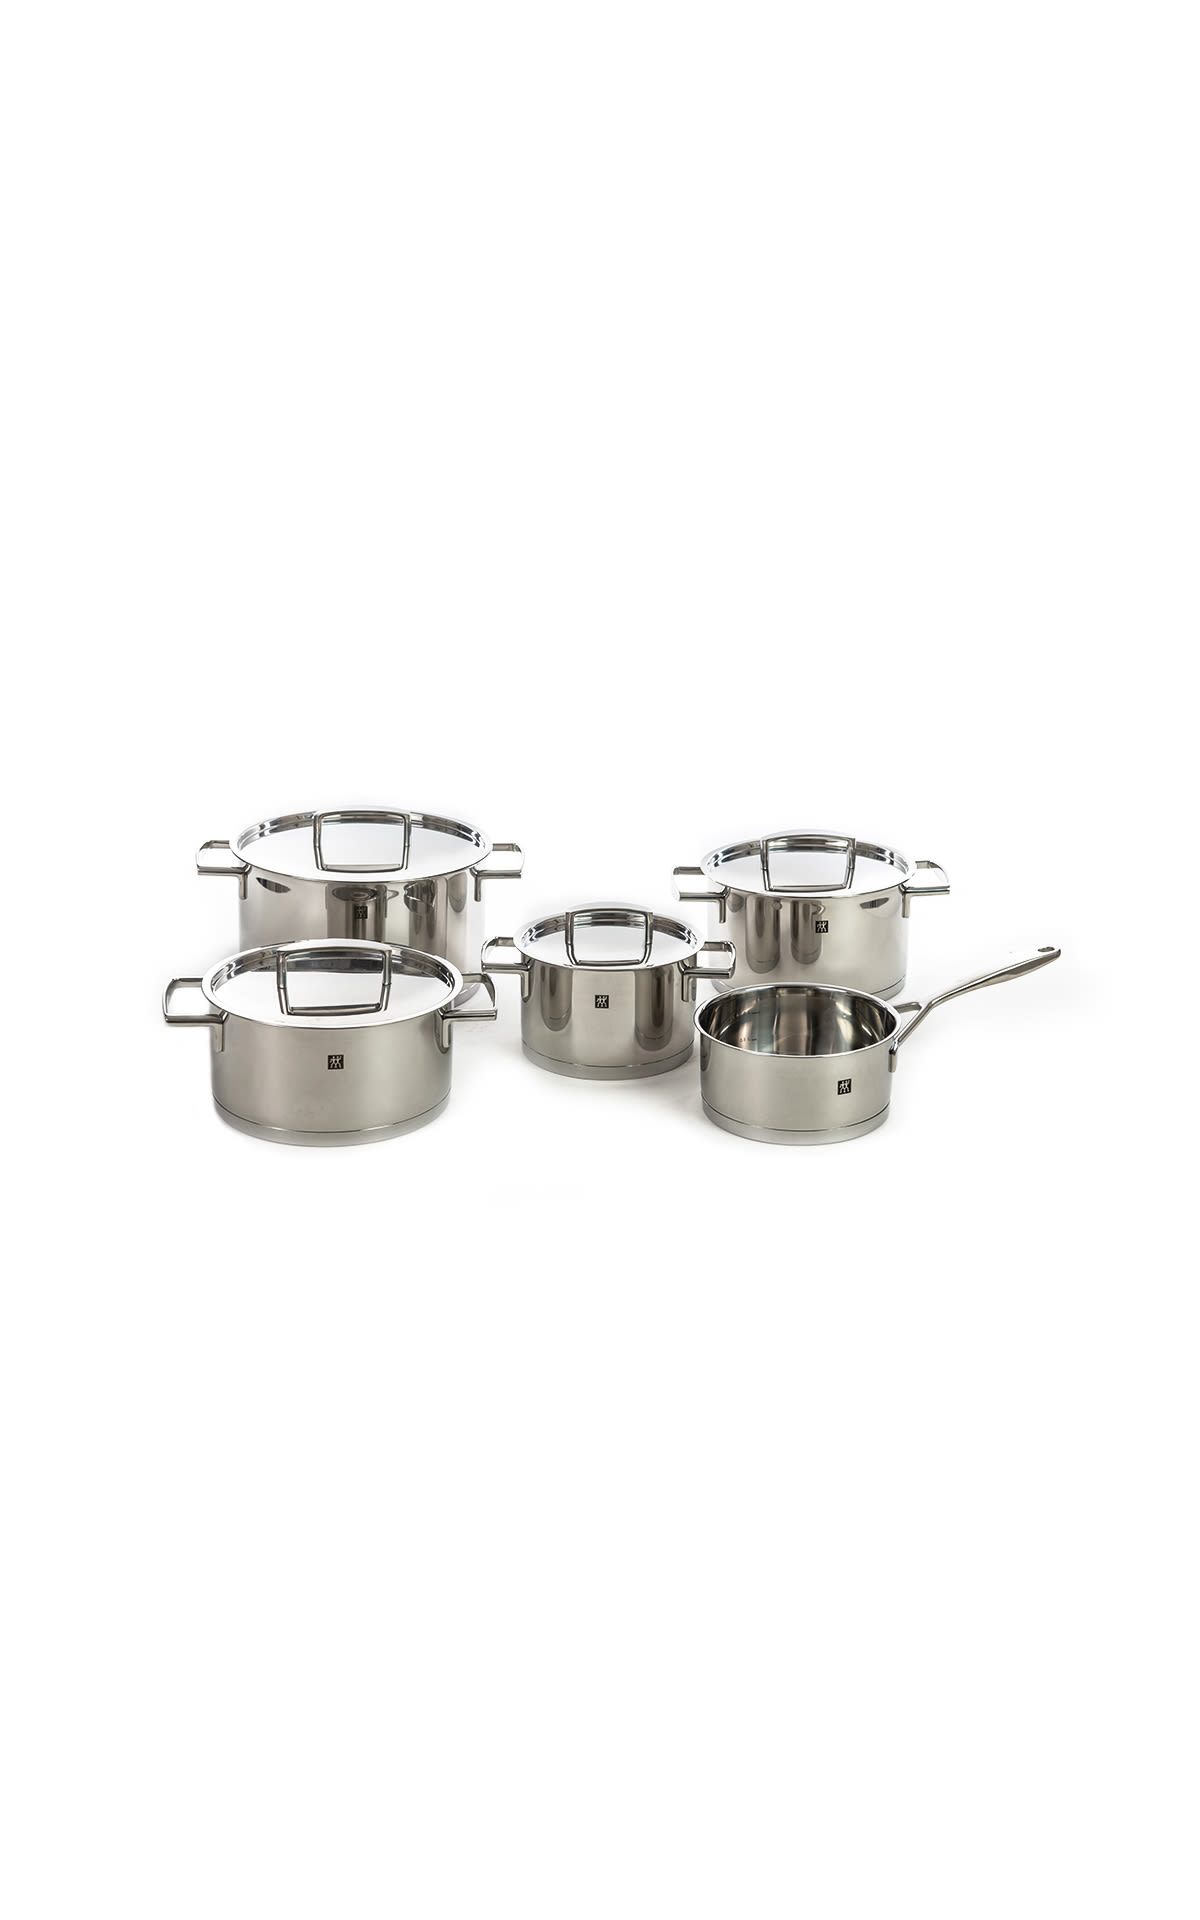 Passion» stainless steel cookware set Zwilling